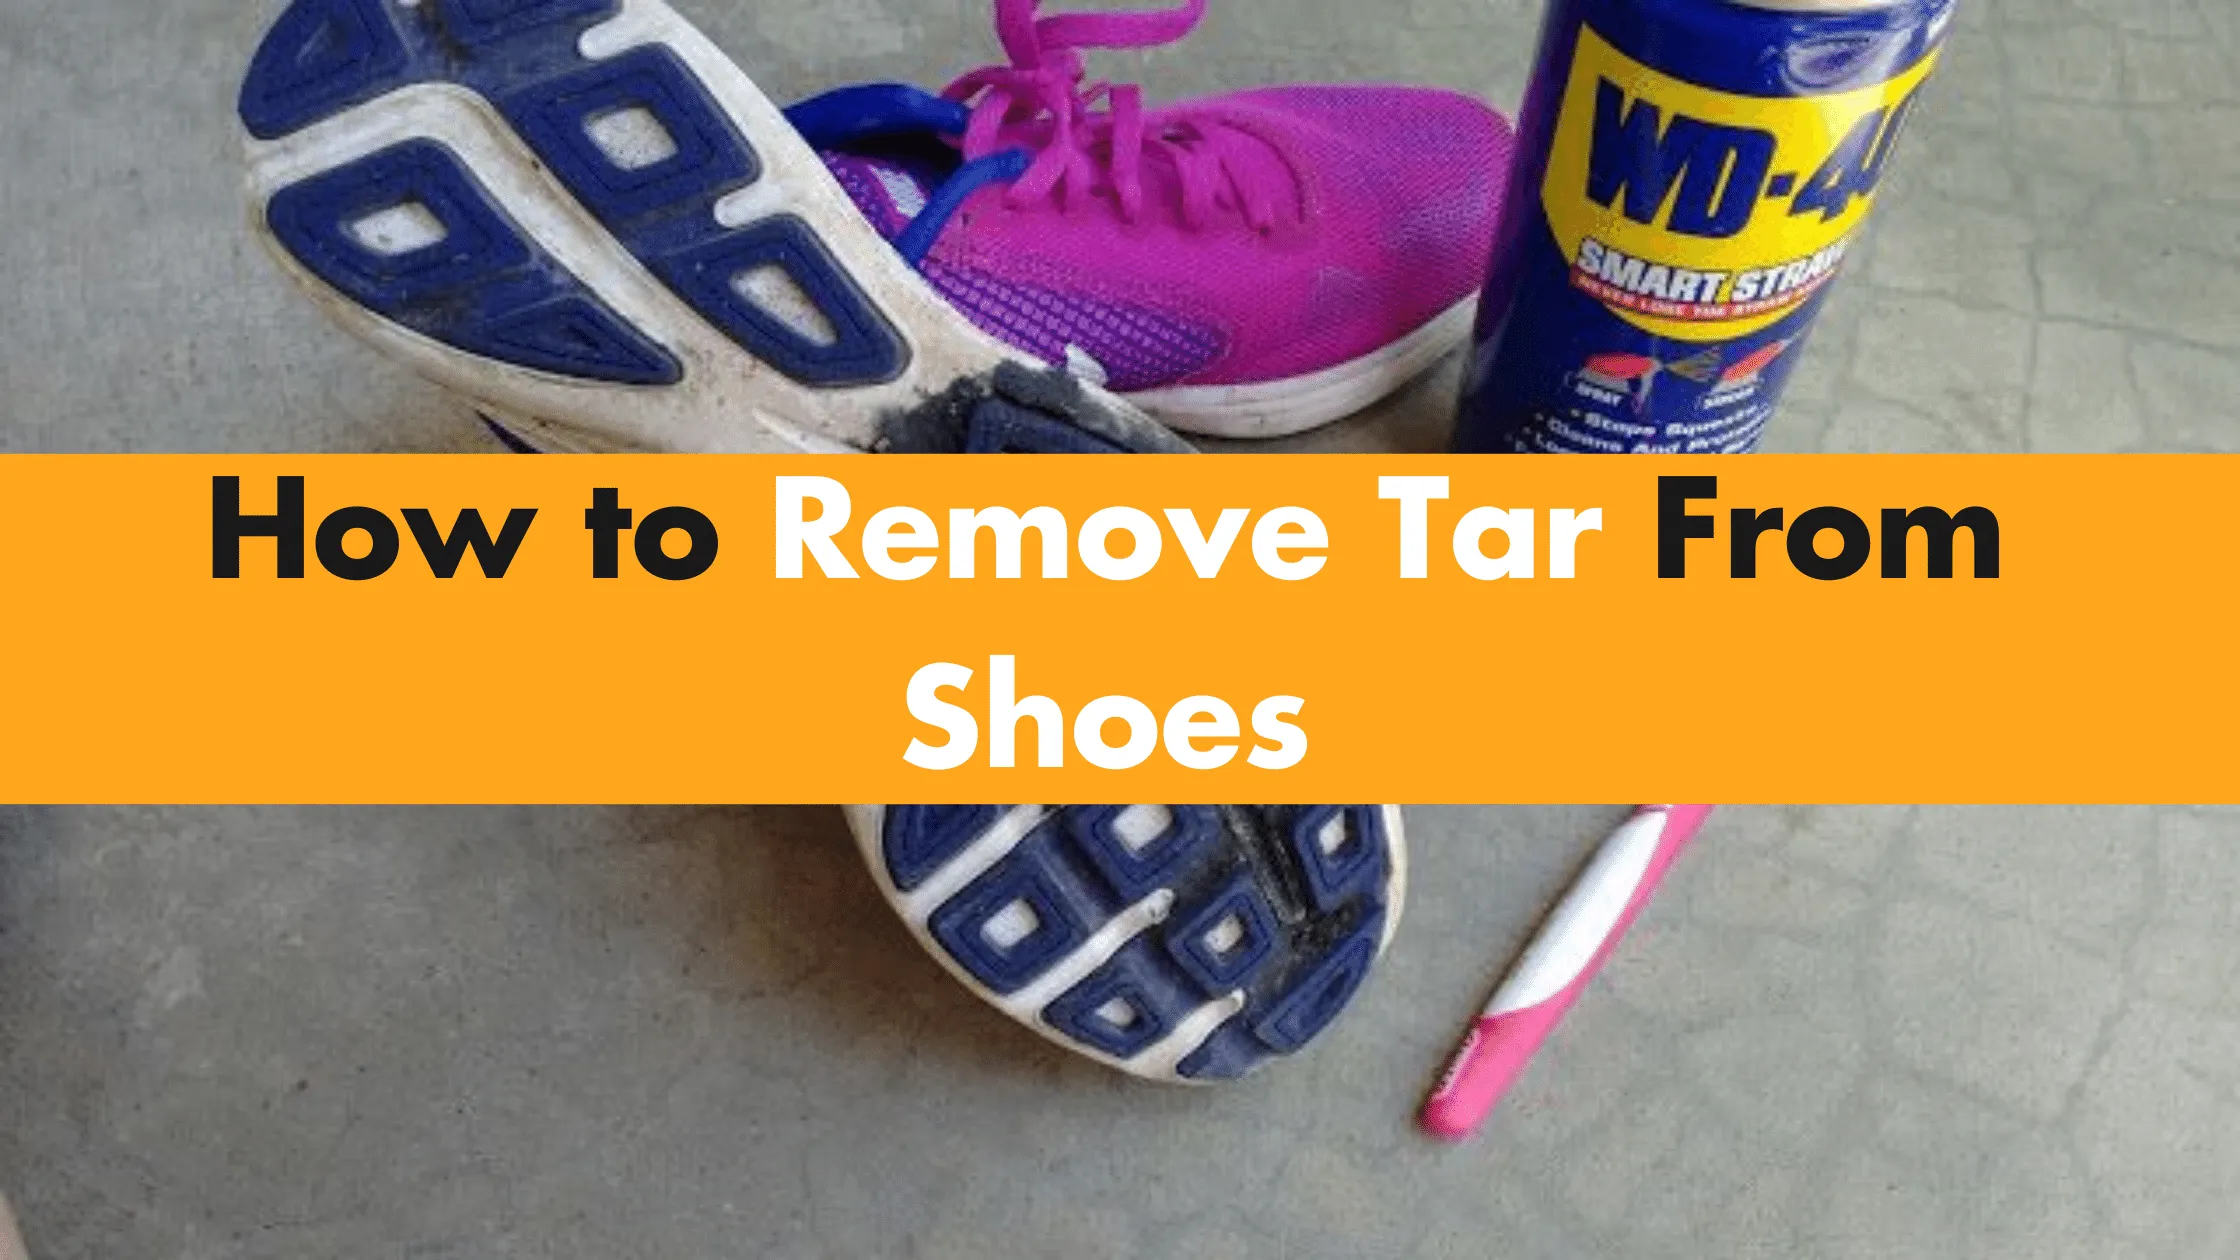 How to Remove Tar From Shoes